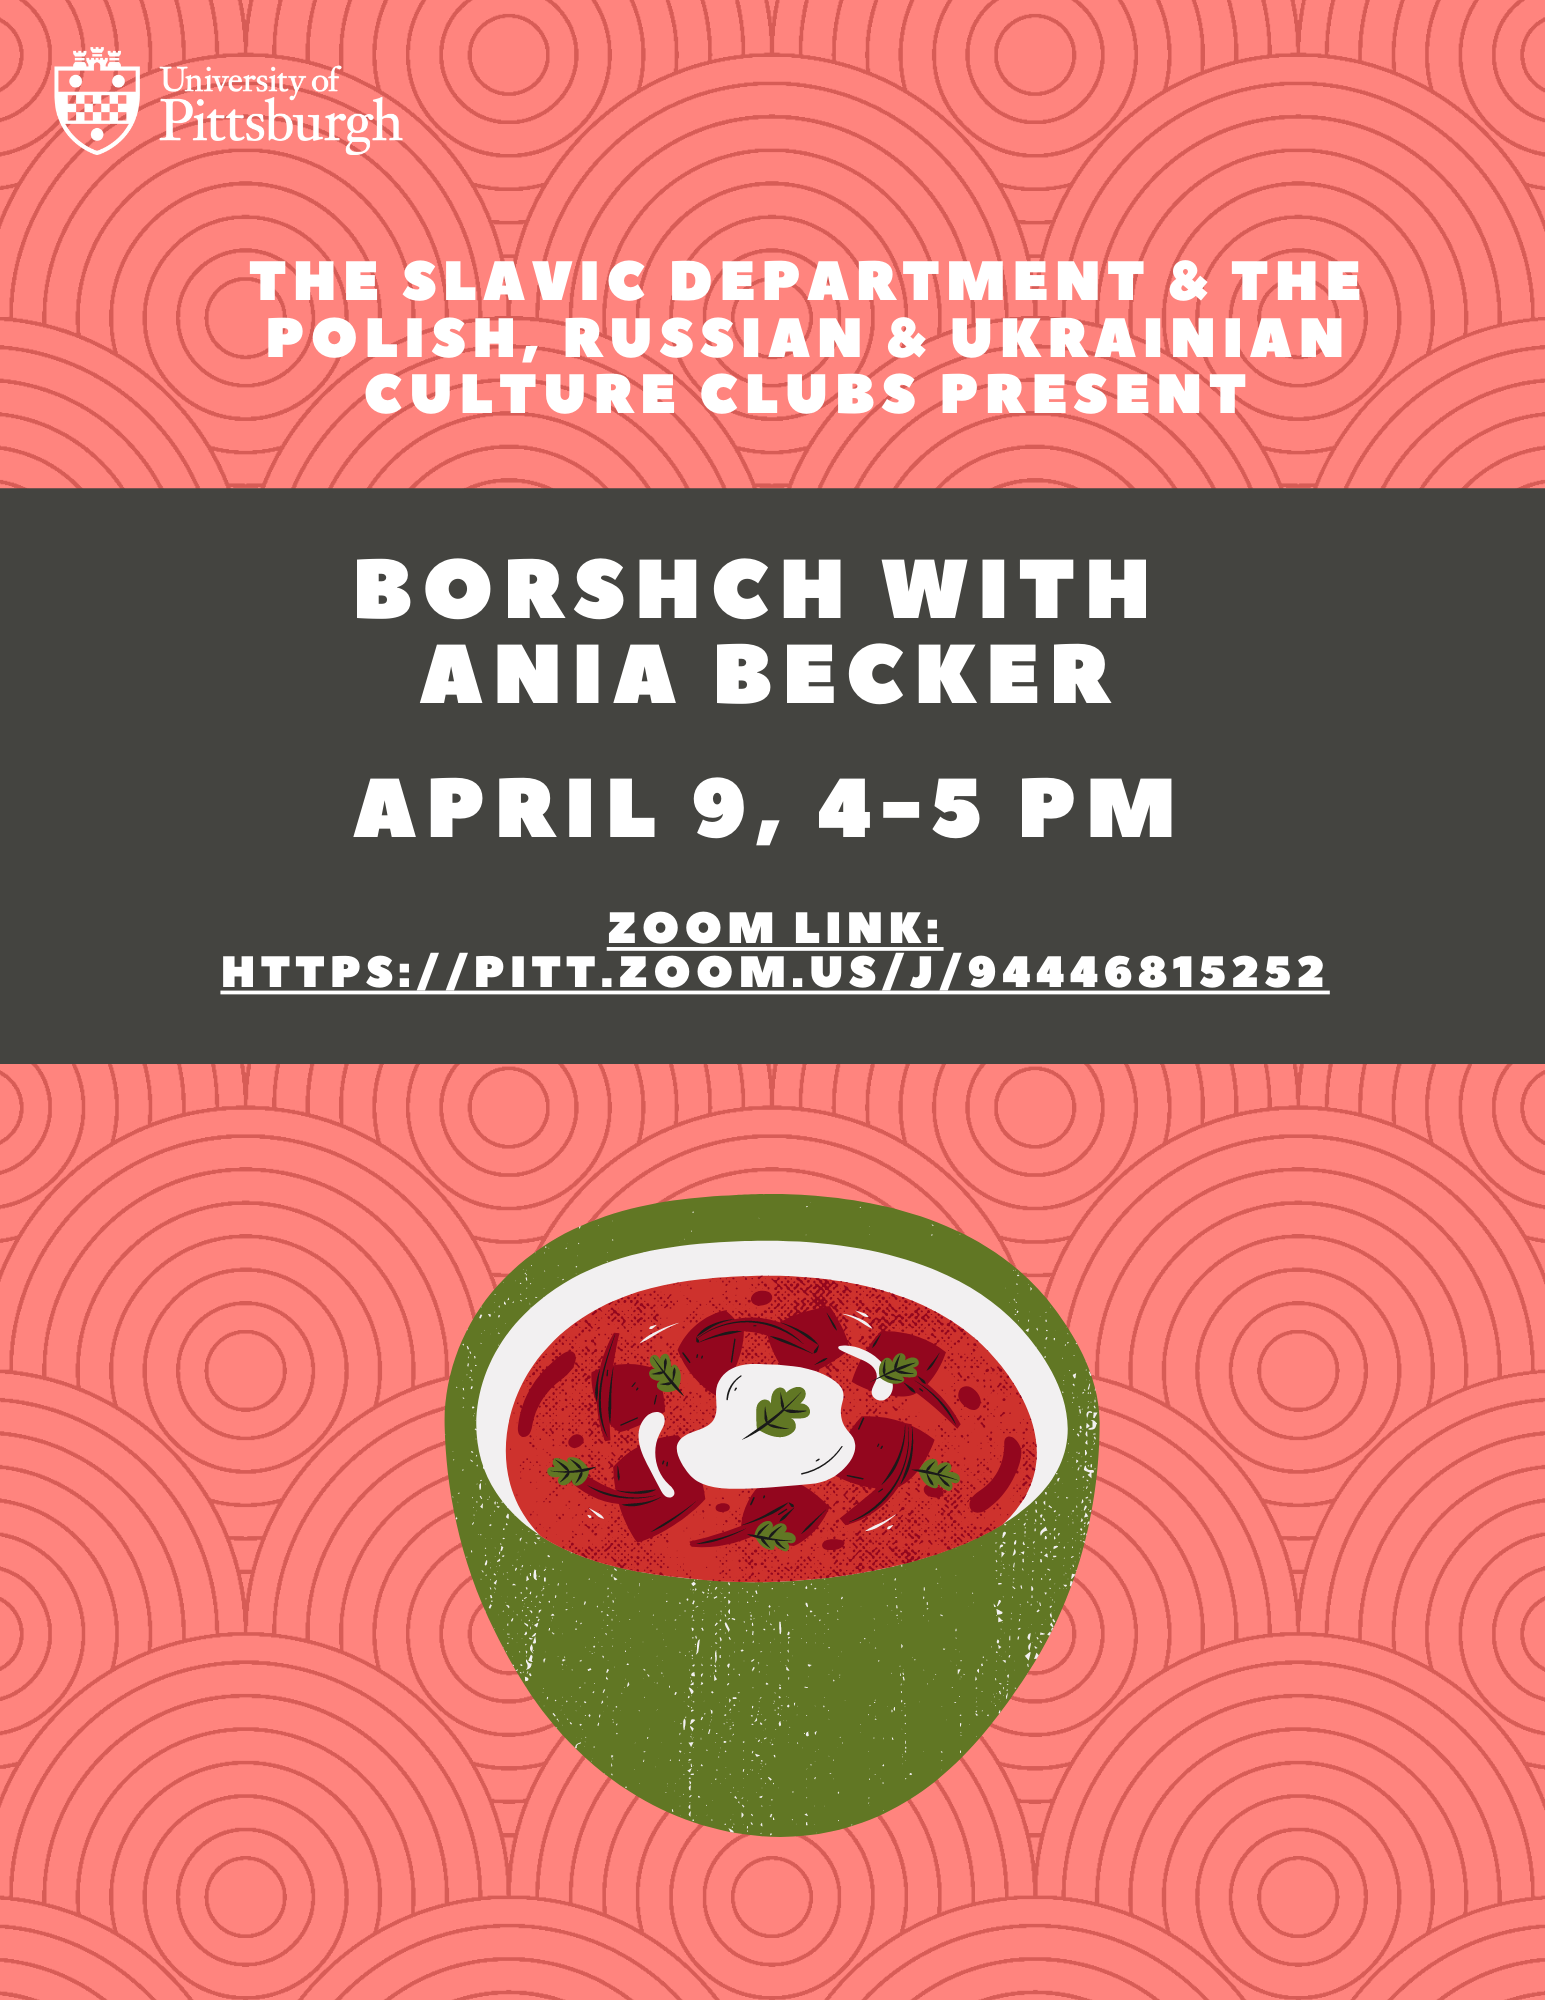 Pink background with concentric circle pattern and white text and a gray banner: Text describes the Borshch with Ania Becker event taking place on April 9; accessible pdf flyer is linked to this image